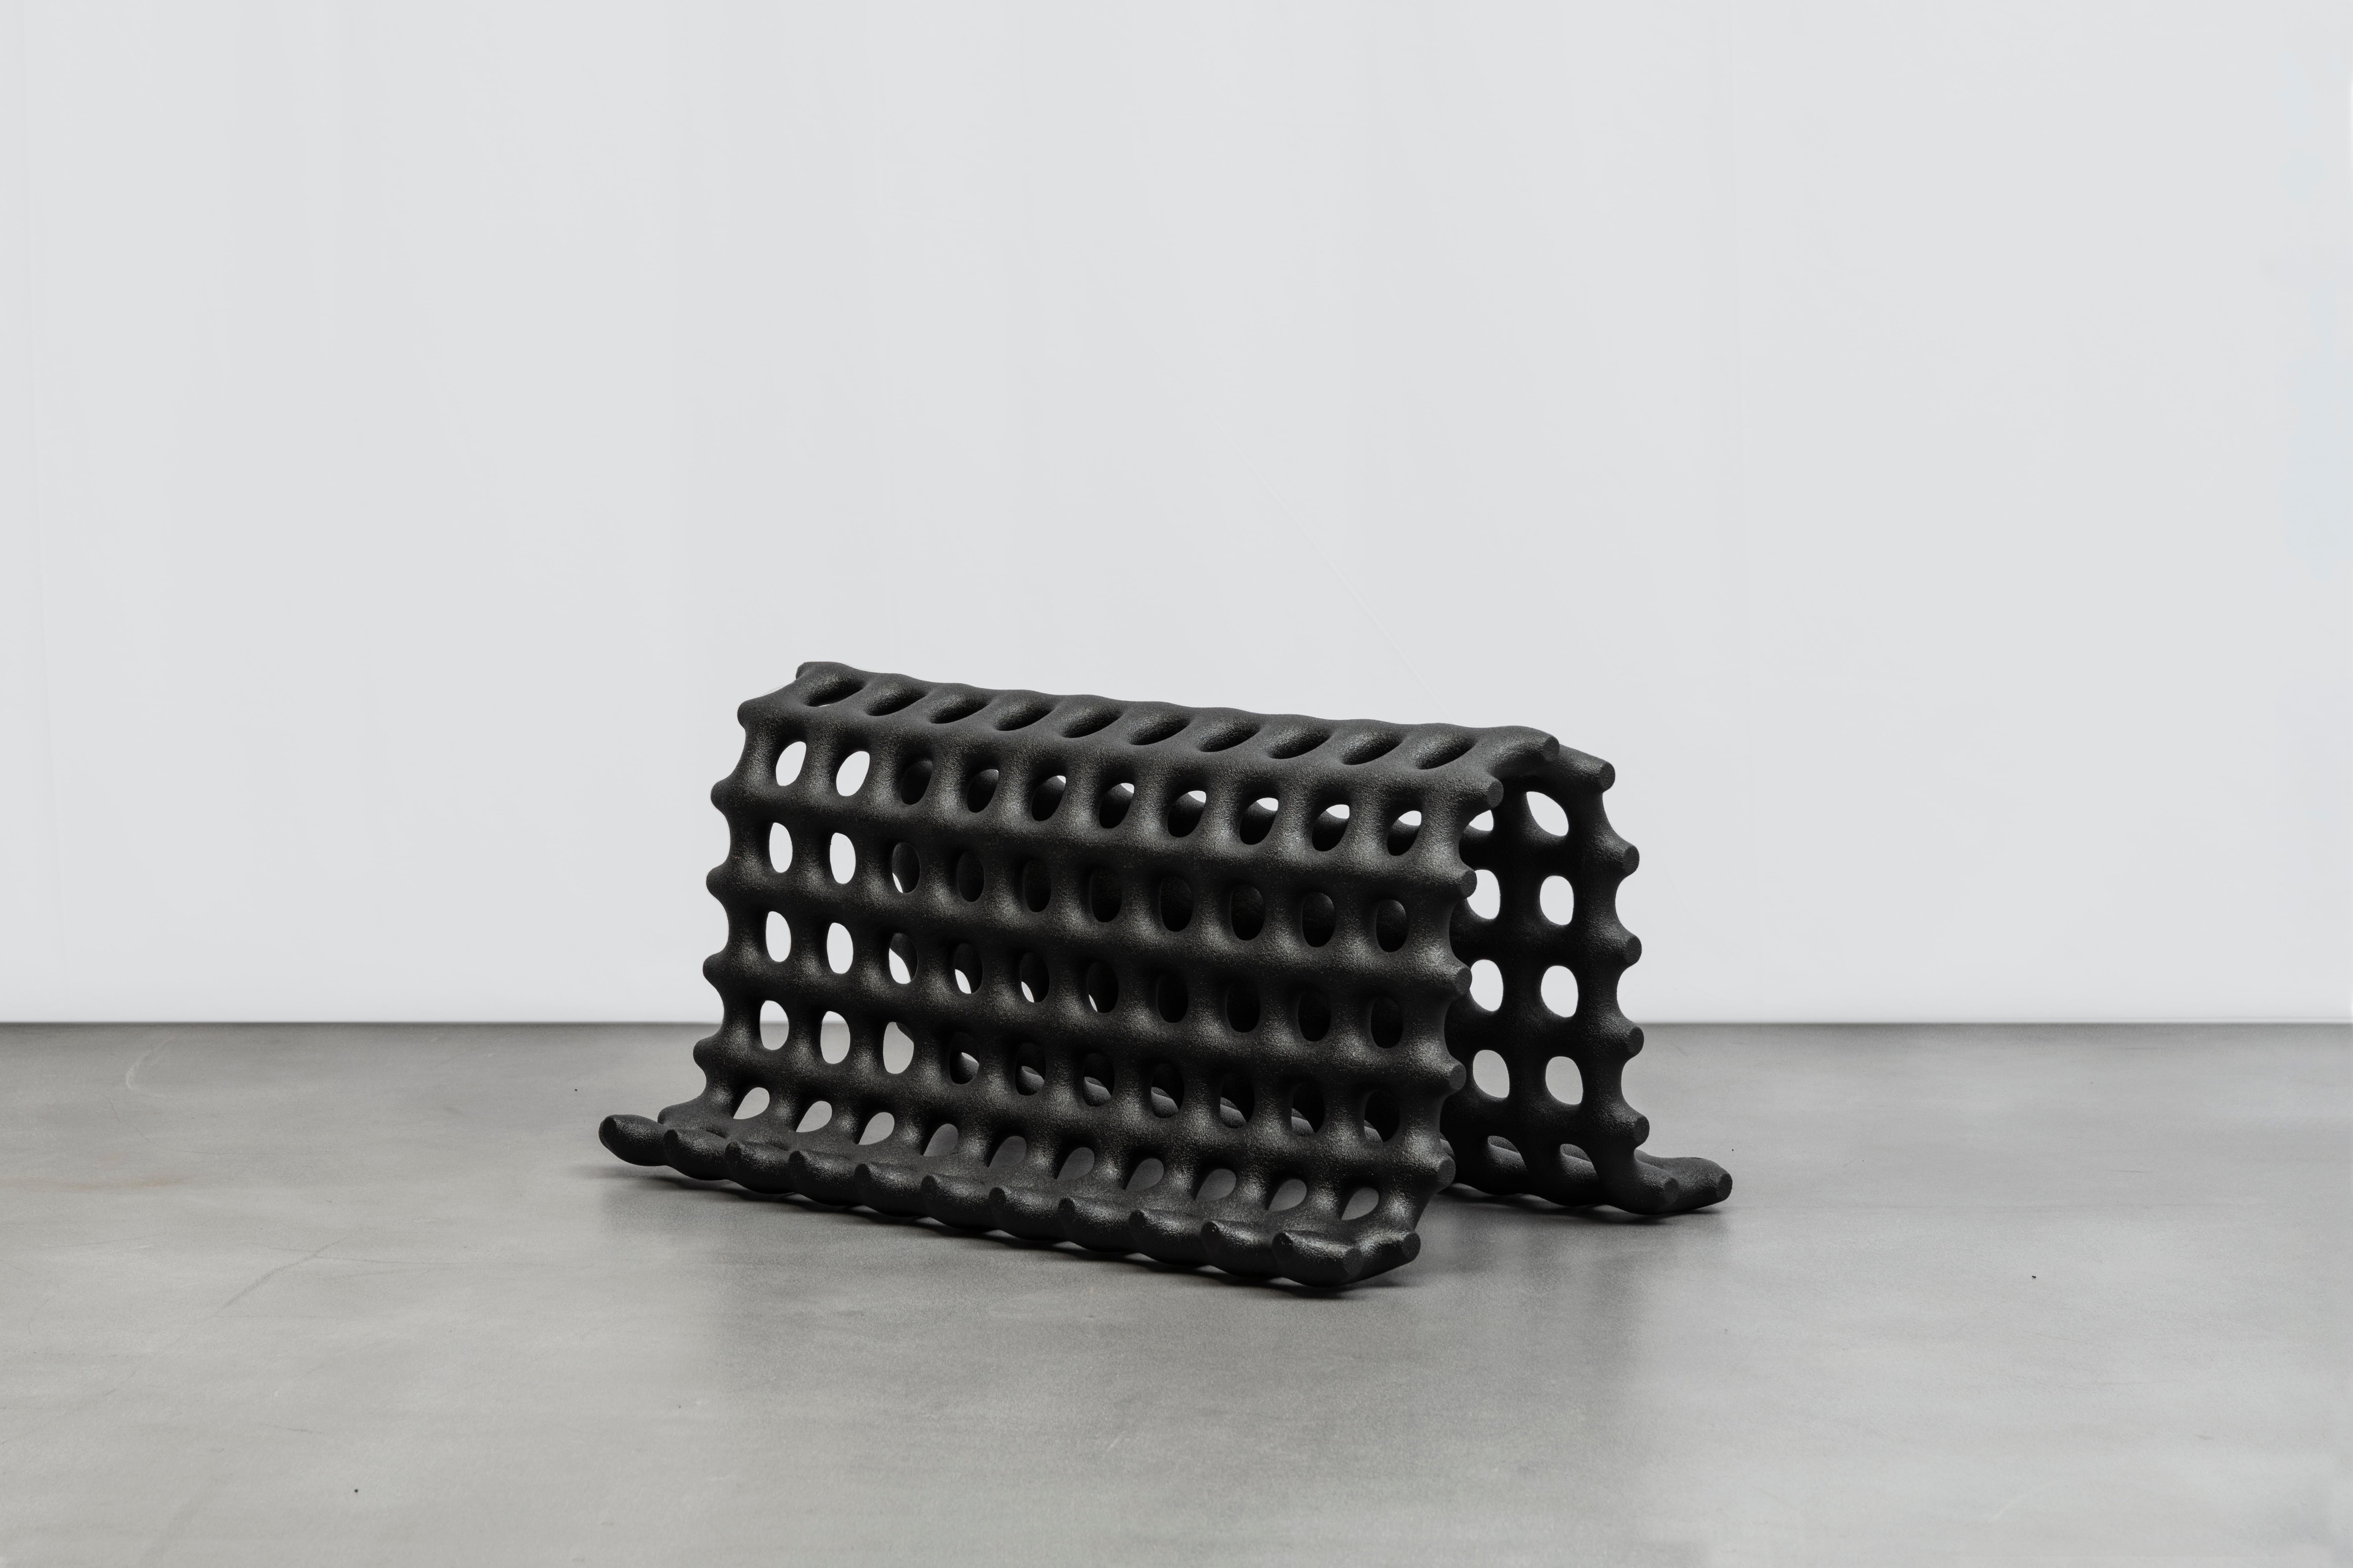 Grid bench by Hot Wire Extensions
Limited edition
Materials: Waste SLS 3D nylon powder, sand from sustainable sources
Dimensions: H 49 x W 100 x D 67 cm
Colours: black, white

Hot Wire Extensions is a young sustainable design brand, presenting a